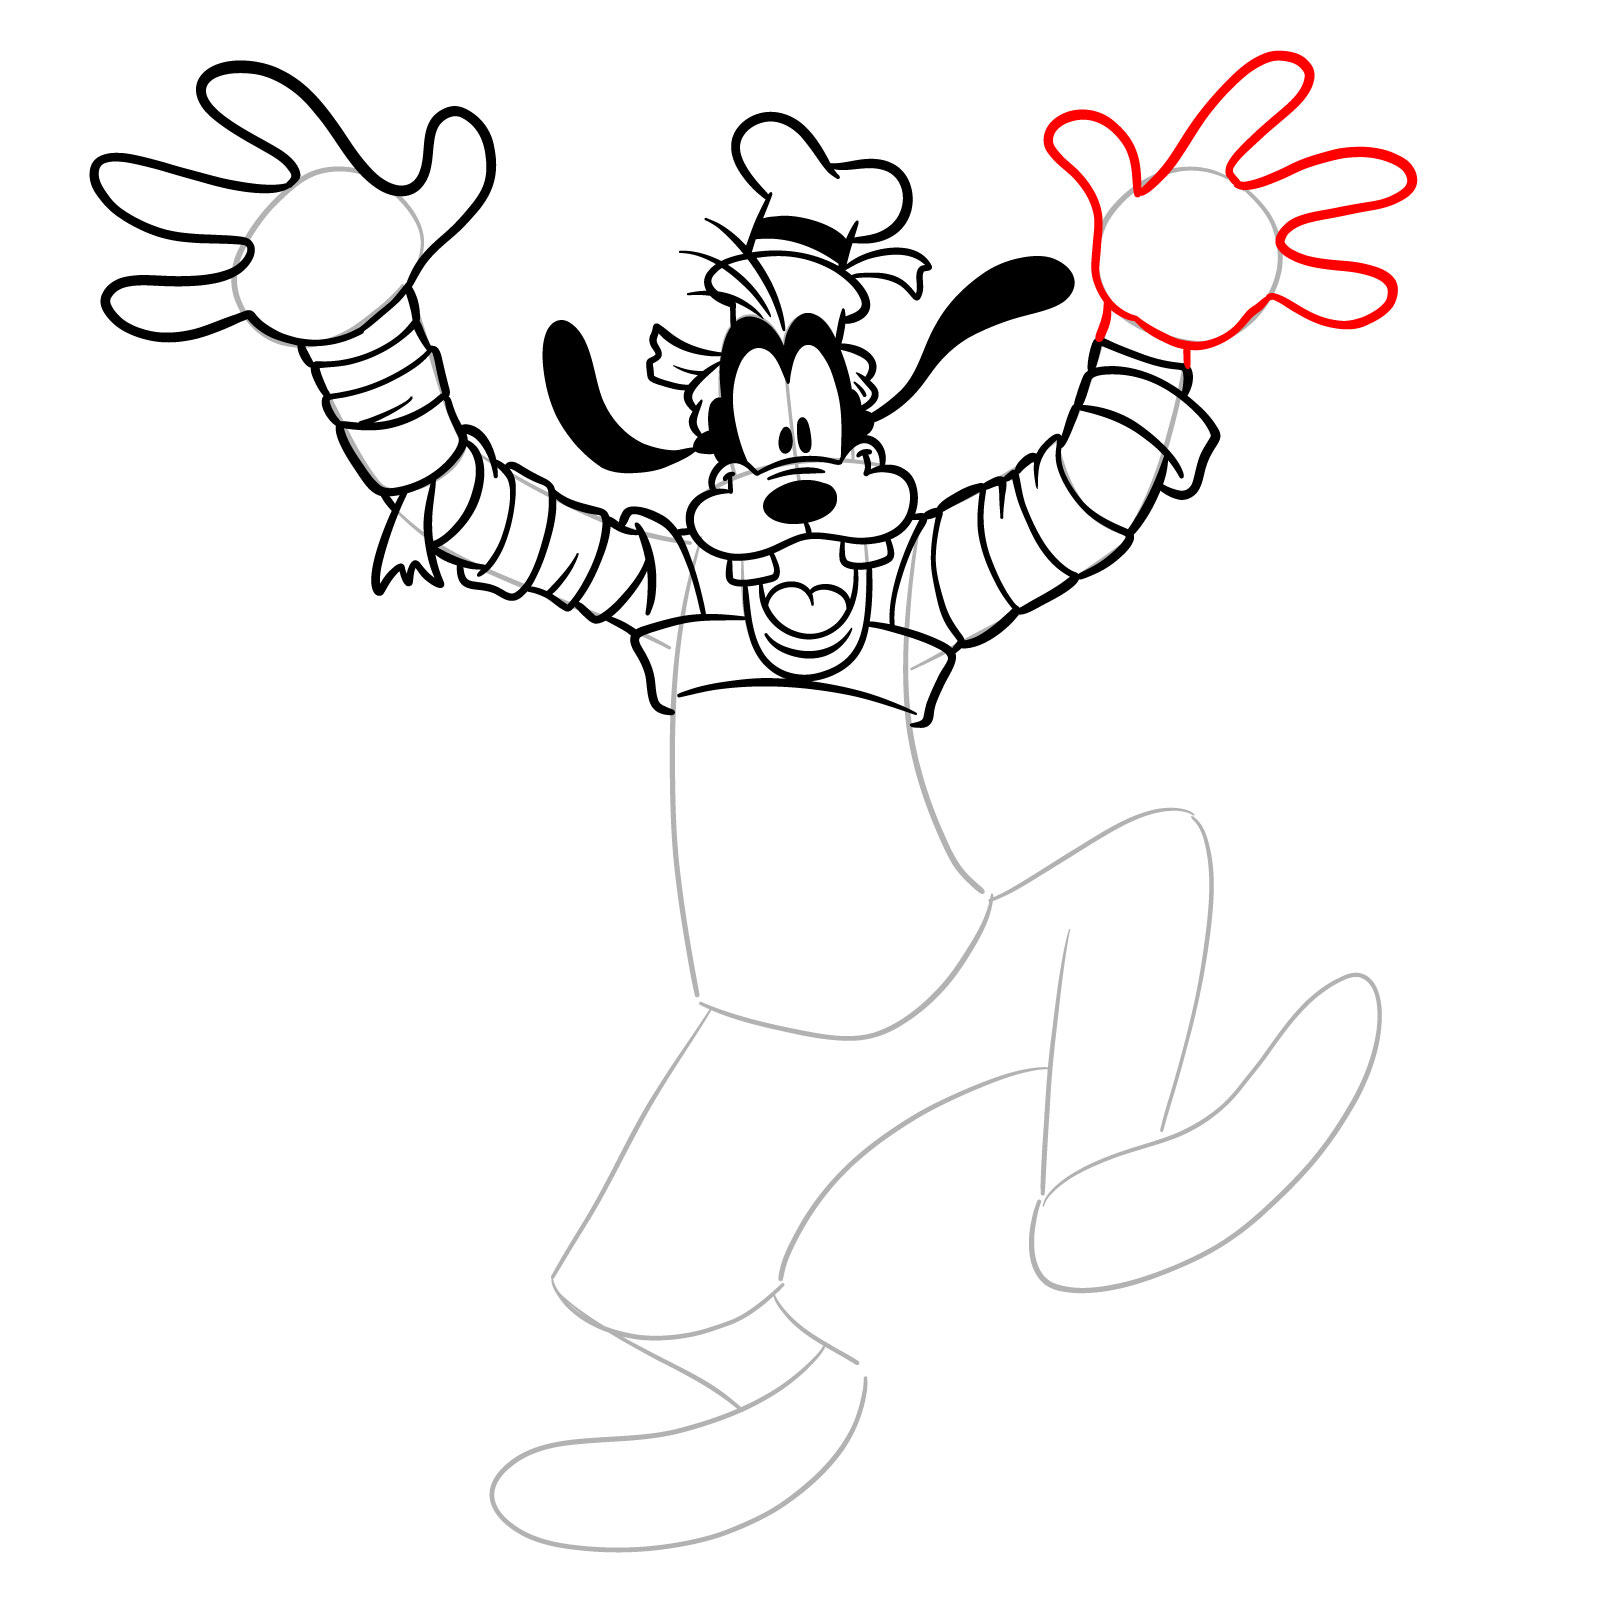 How to draw Halloween Goofy as a mummy - step 19